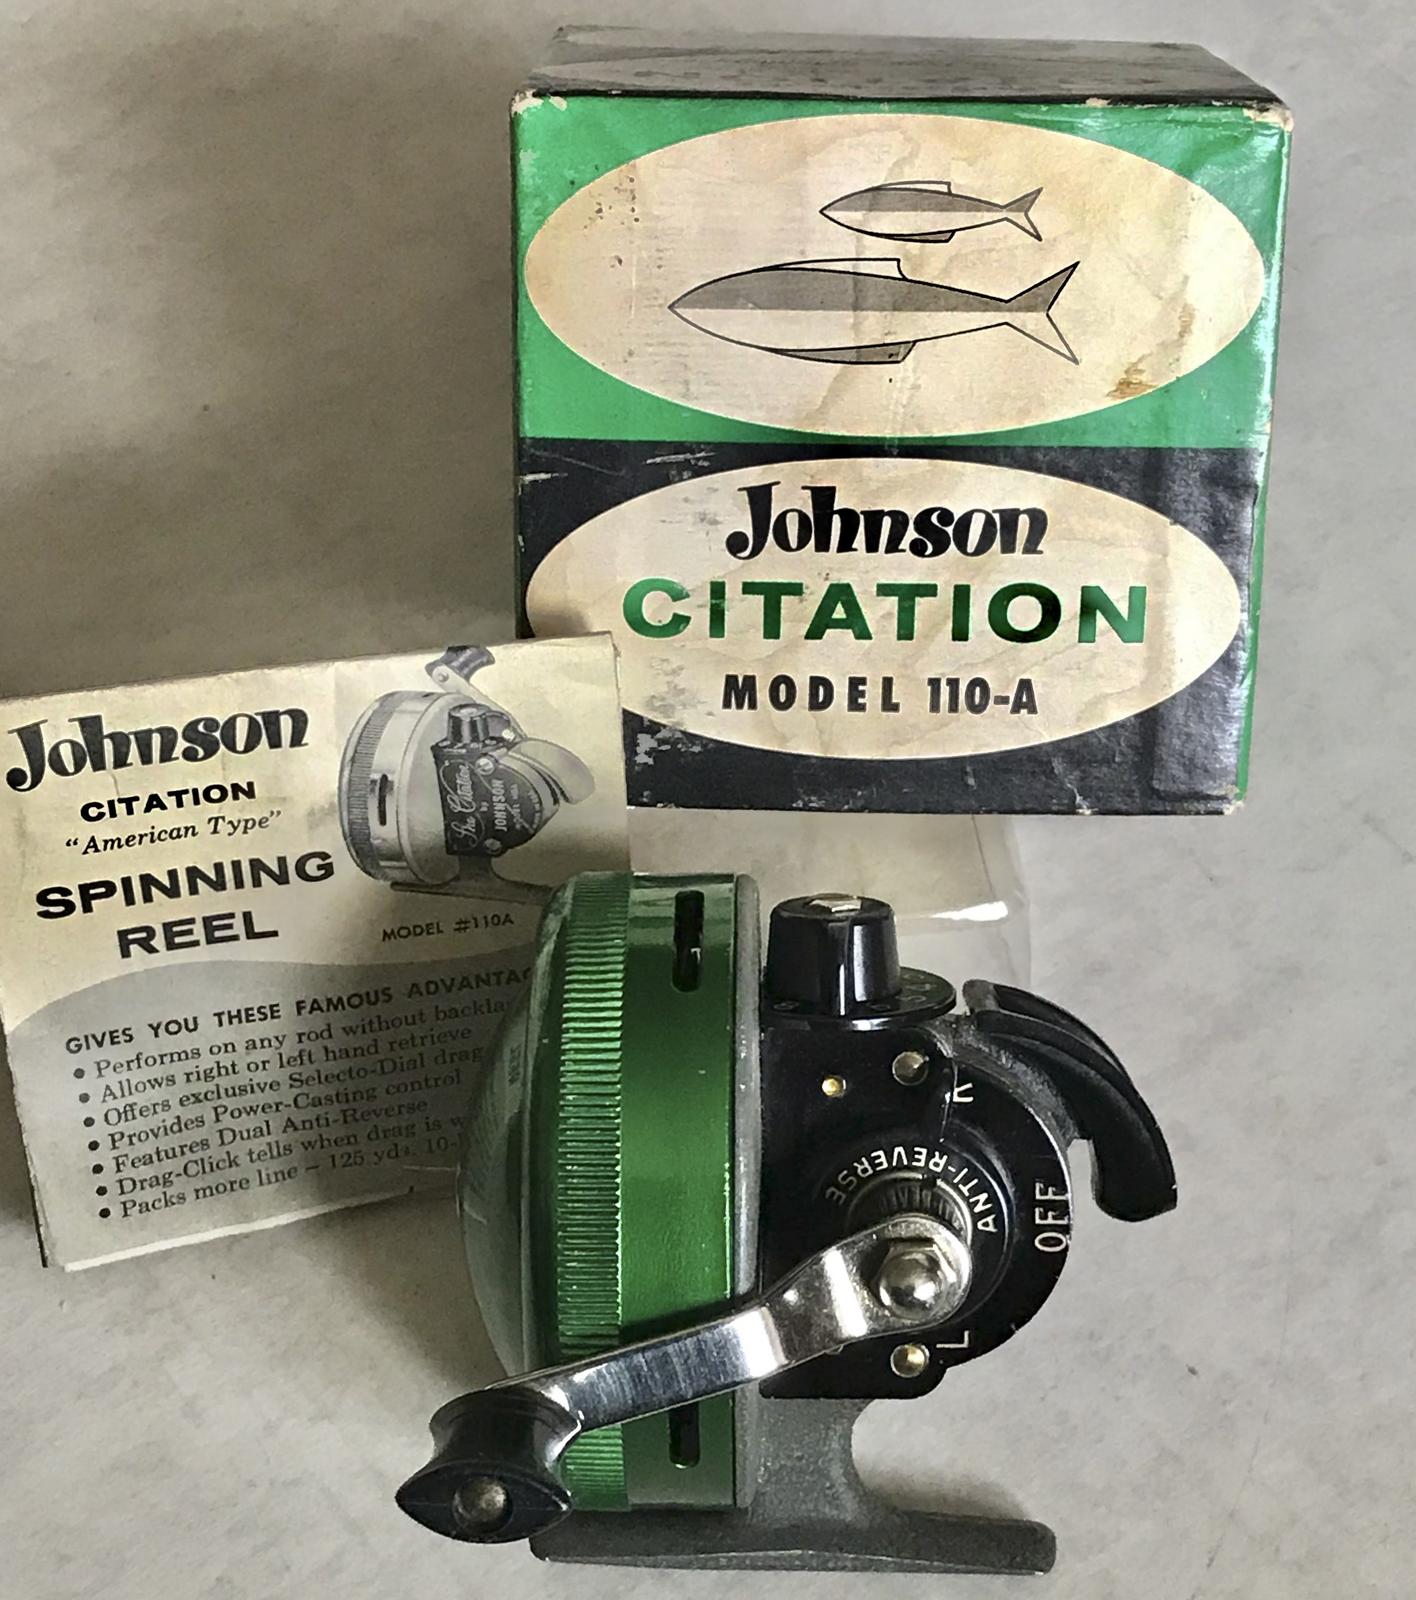 Vintage Johnson Citation 110B Spinning Reel with Original Box and Papers /  Antique Fishing Reel Johnson Citation 110B